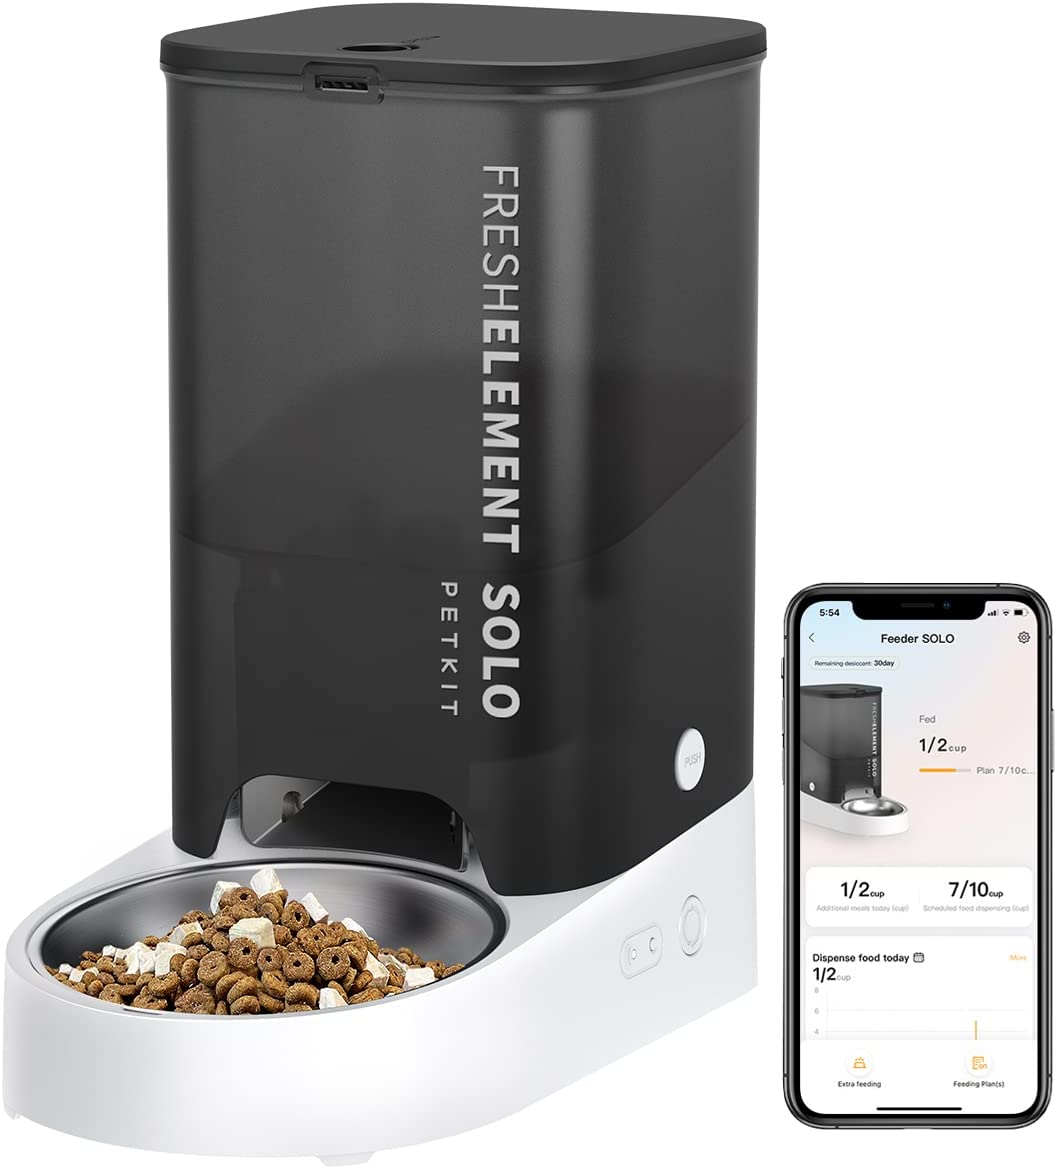 PETKIT Automatic WiFi Cat Feeder, APP Control for Remote Feeding & Monitor, Schedule Up,15 Days of feeding to 10 Meals Per Day